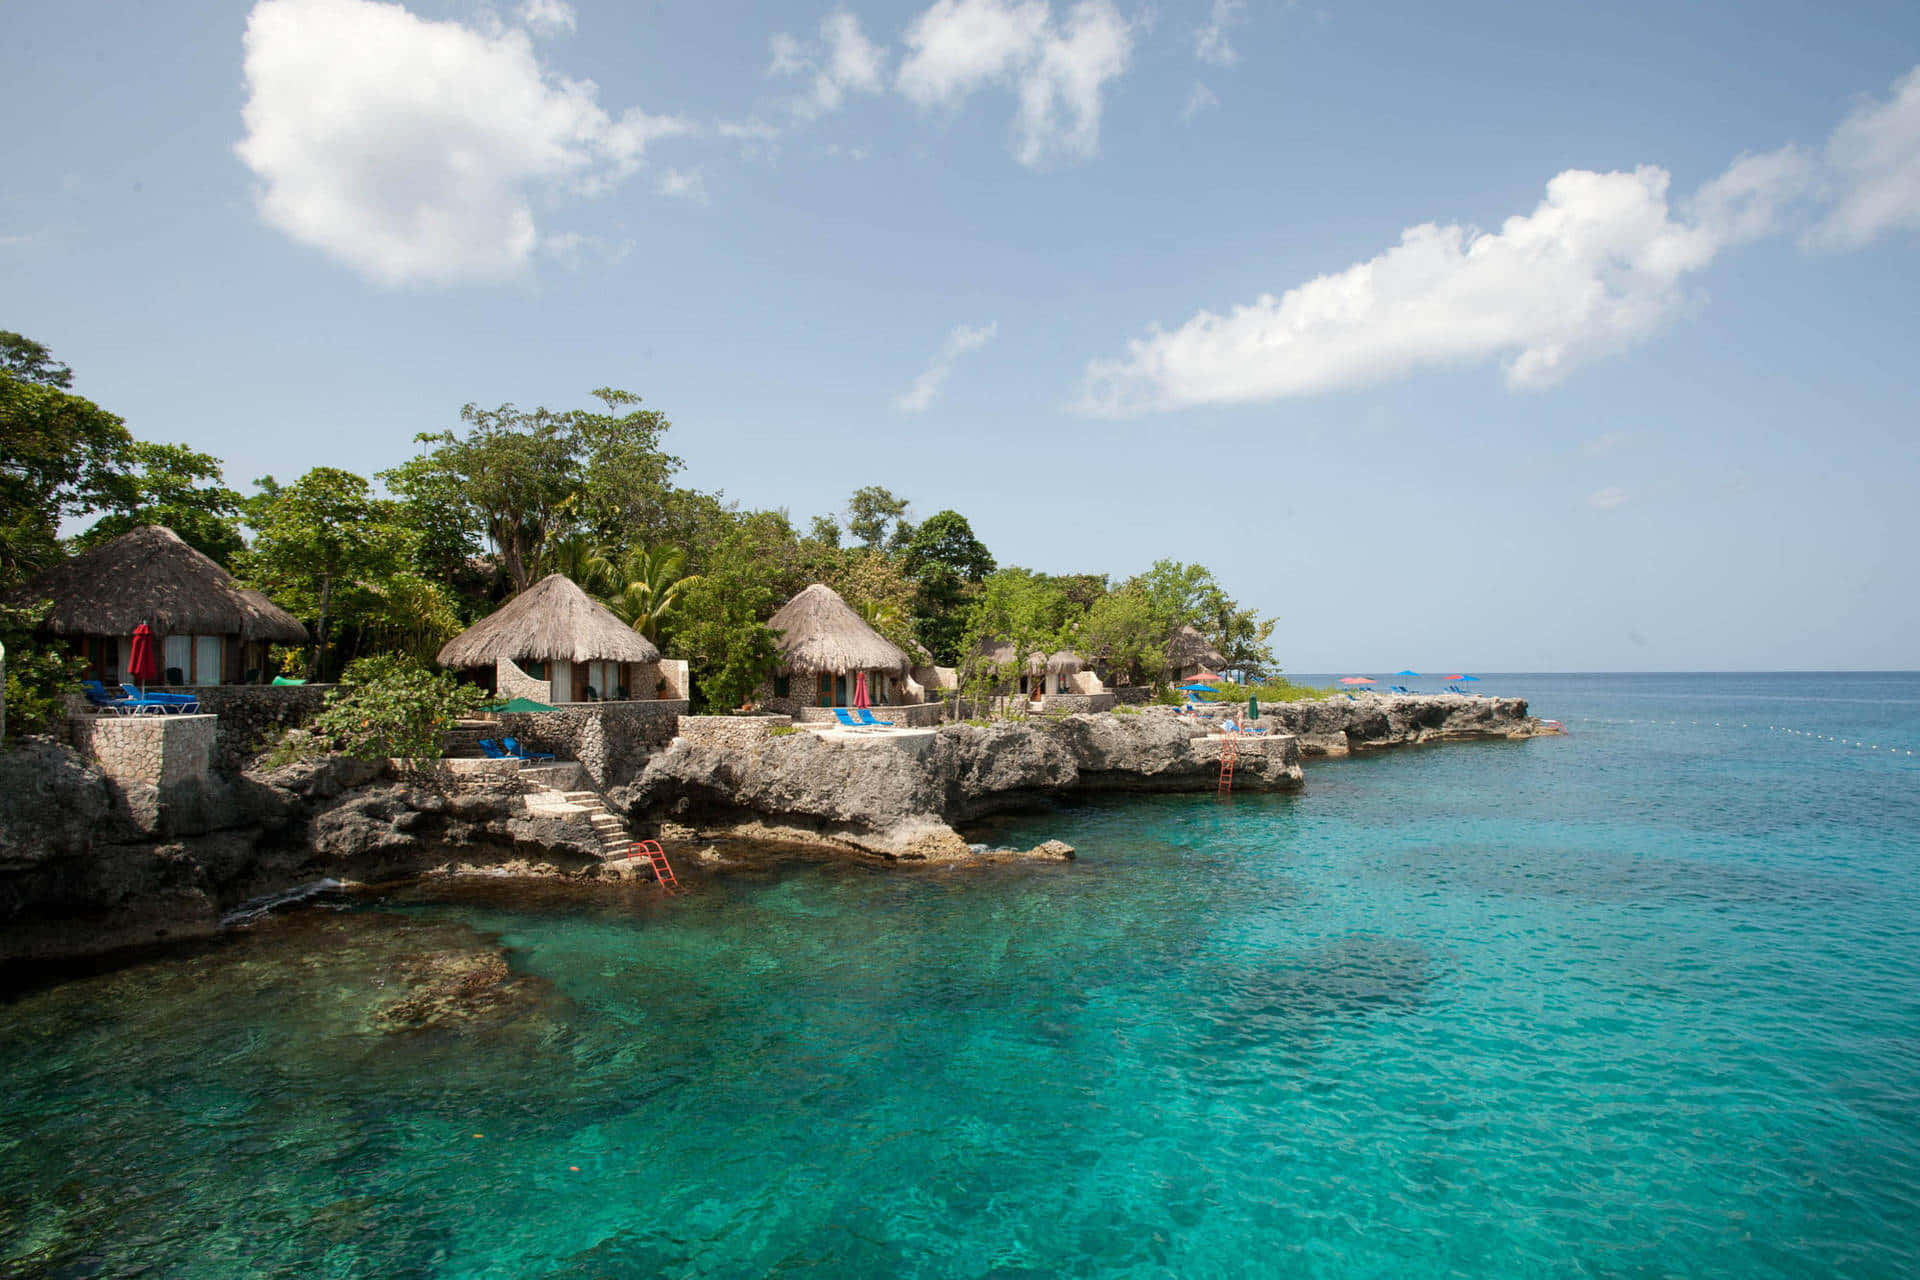 Jamaican Paradise: A breathtaking view of the island's coast with turquoise waters, lush palm trees, and vibrant floral bloom